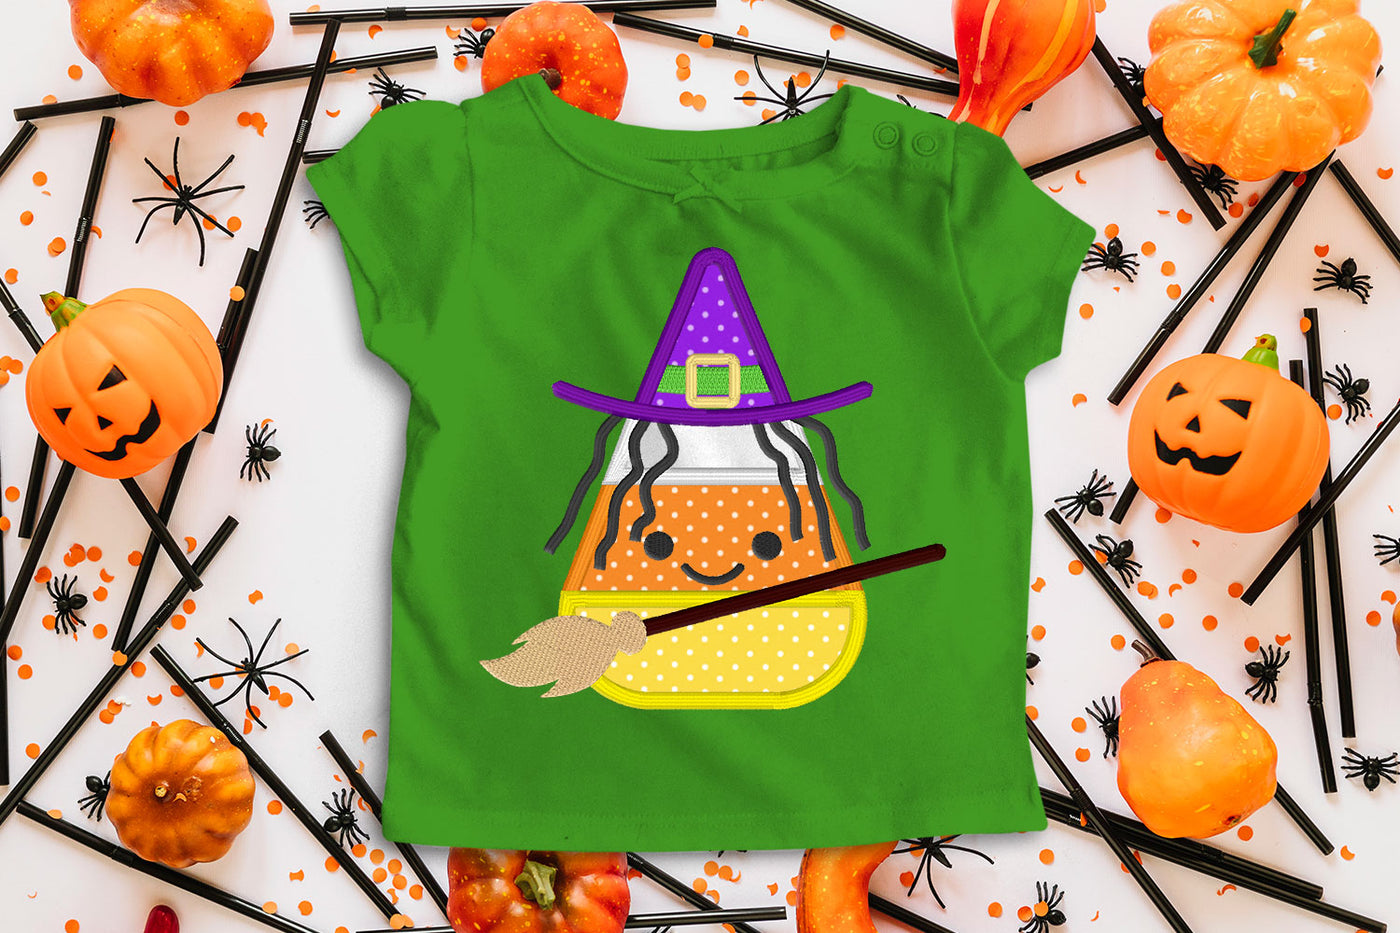 Candy corn dressed as a witch applique embroidery design file